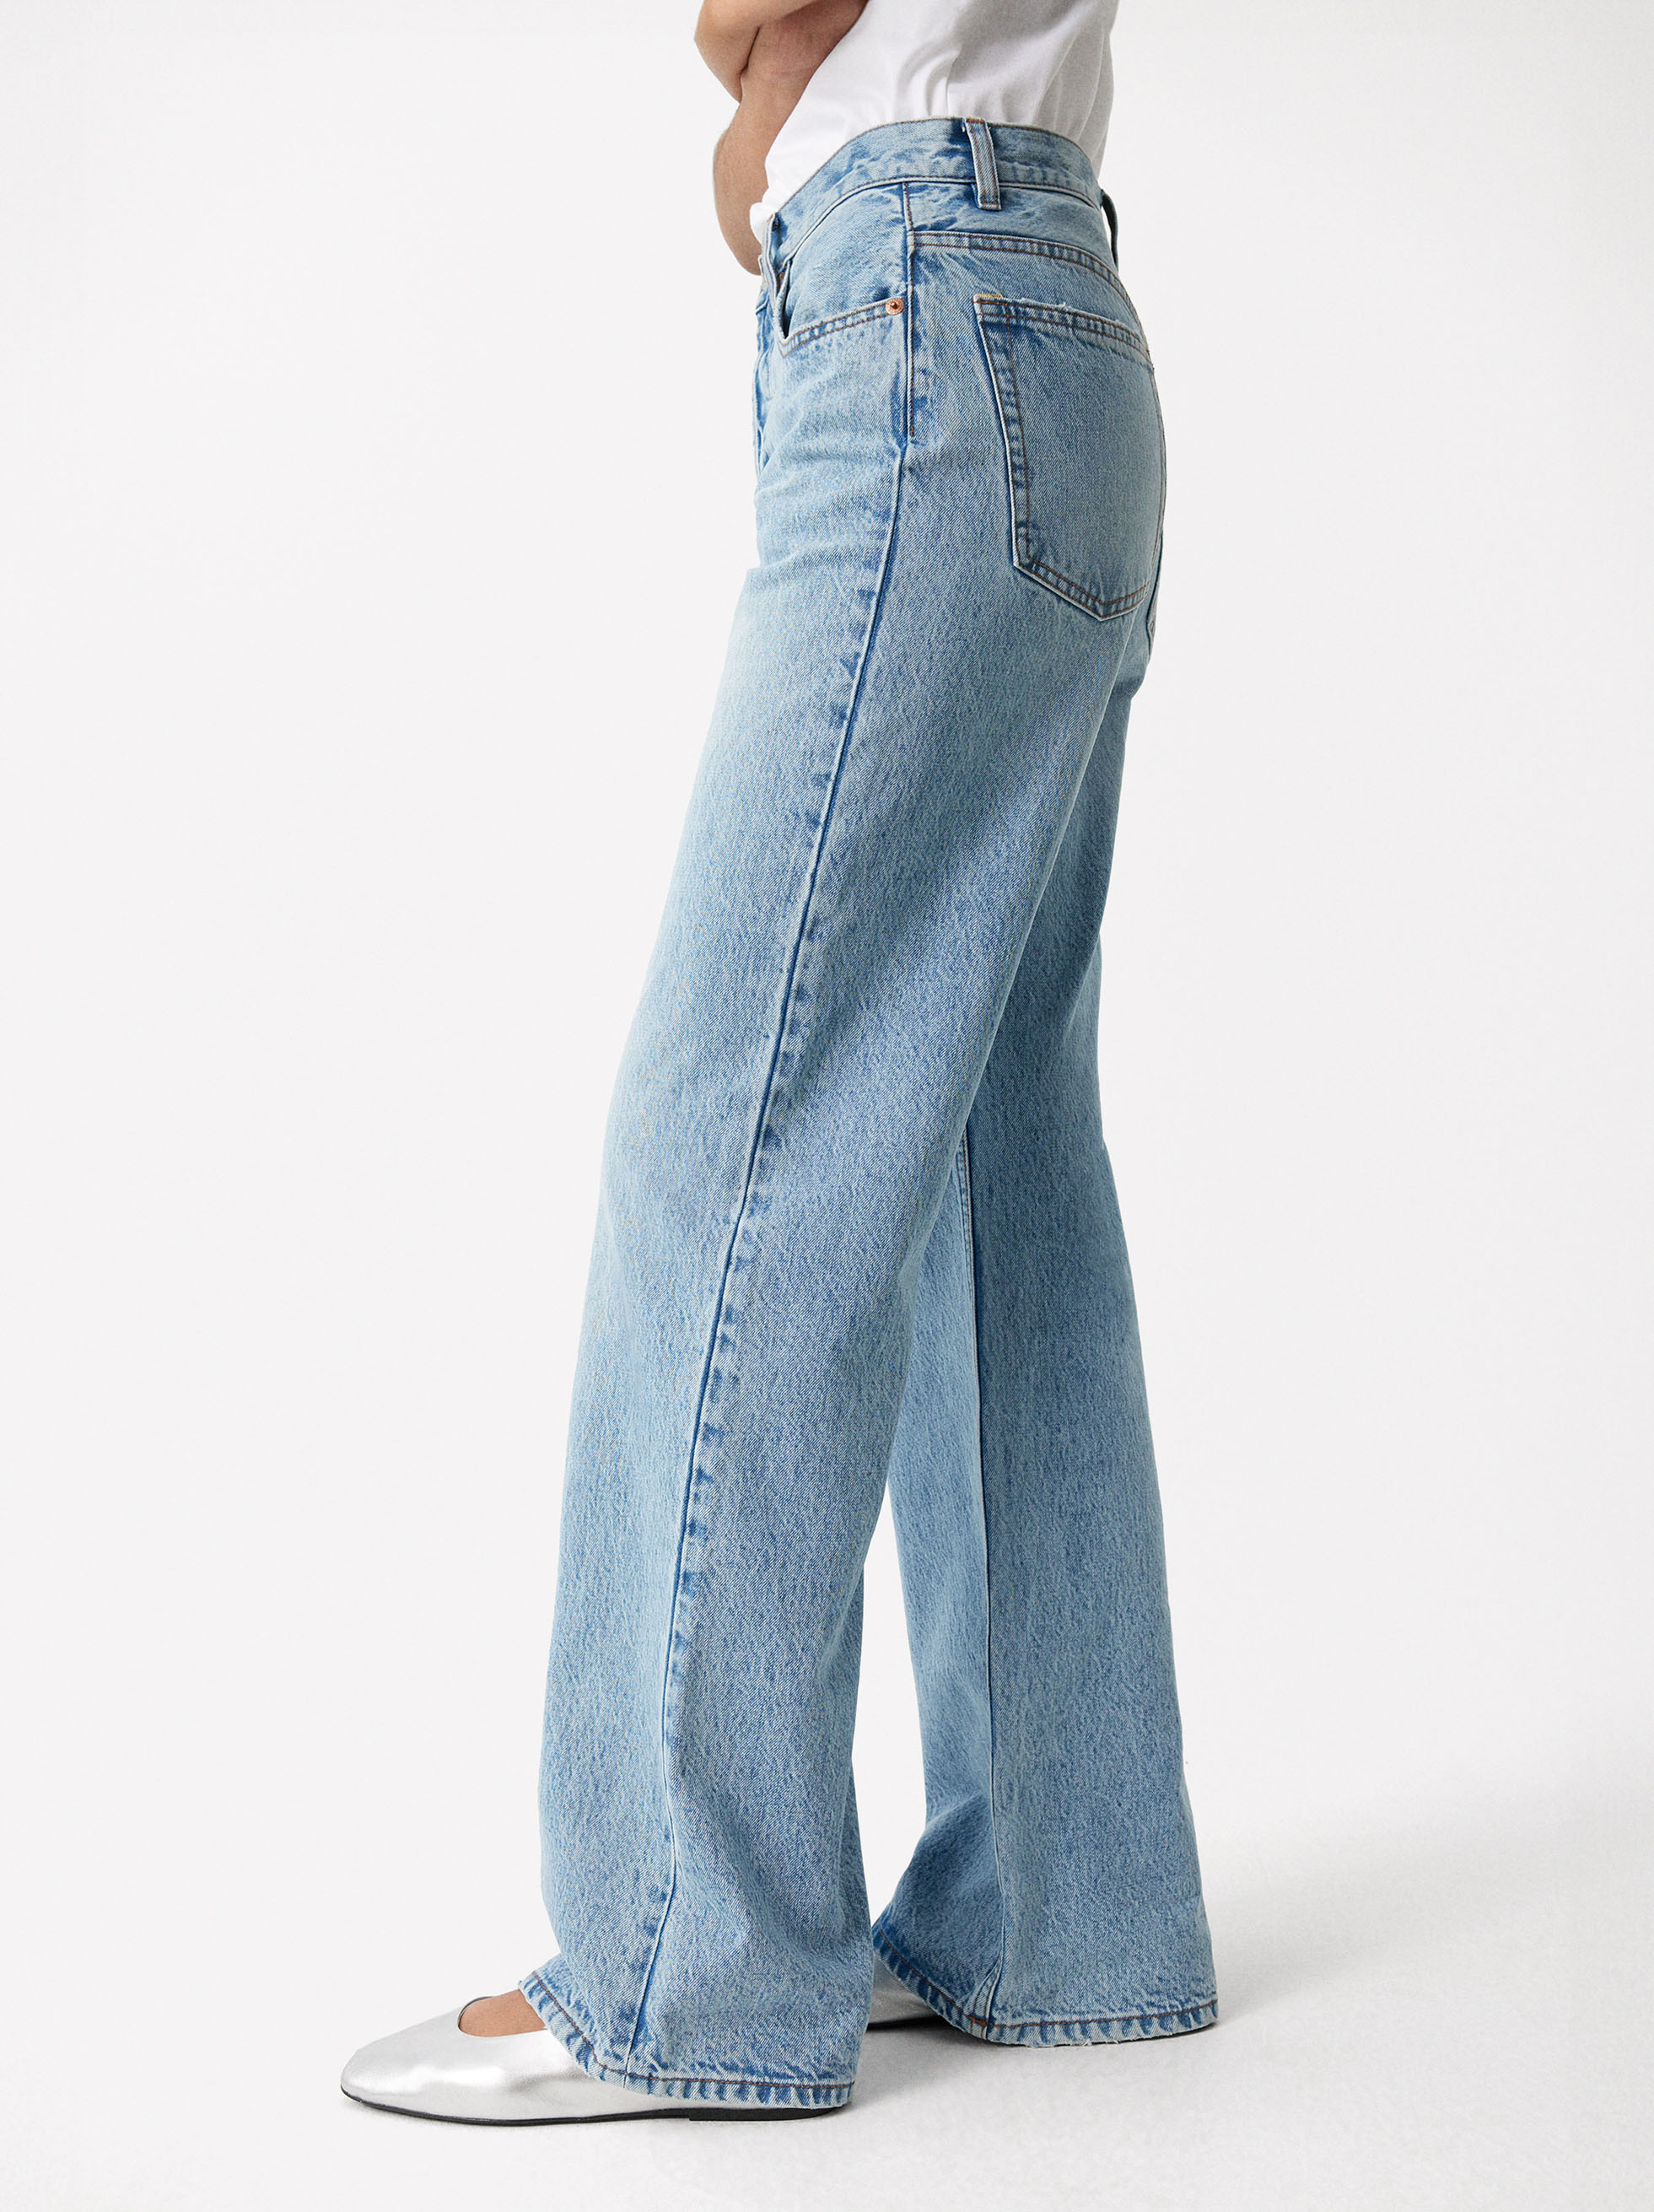 Straight Fit Jeans image number 3.0